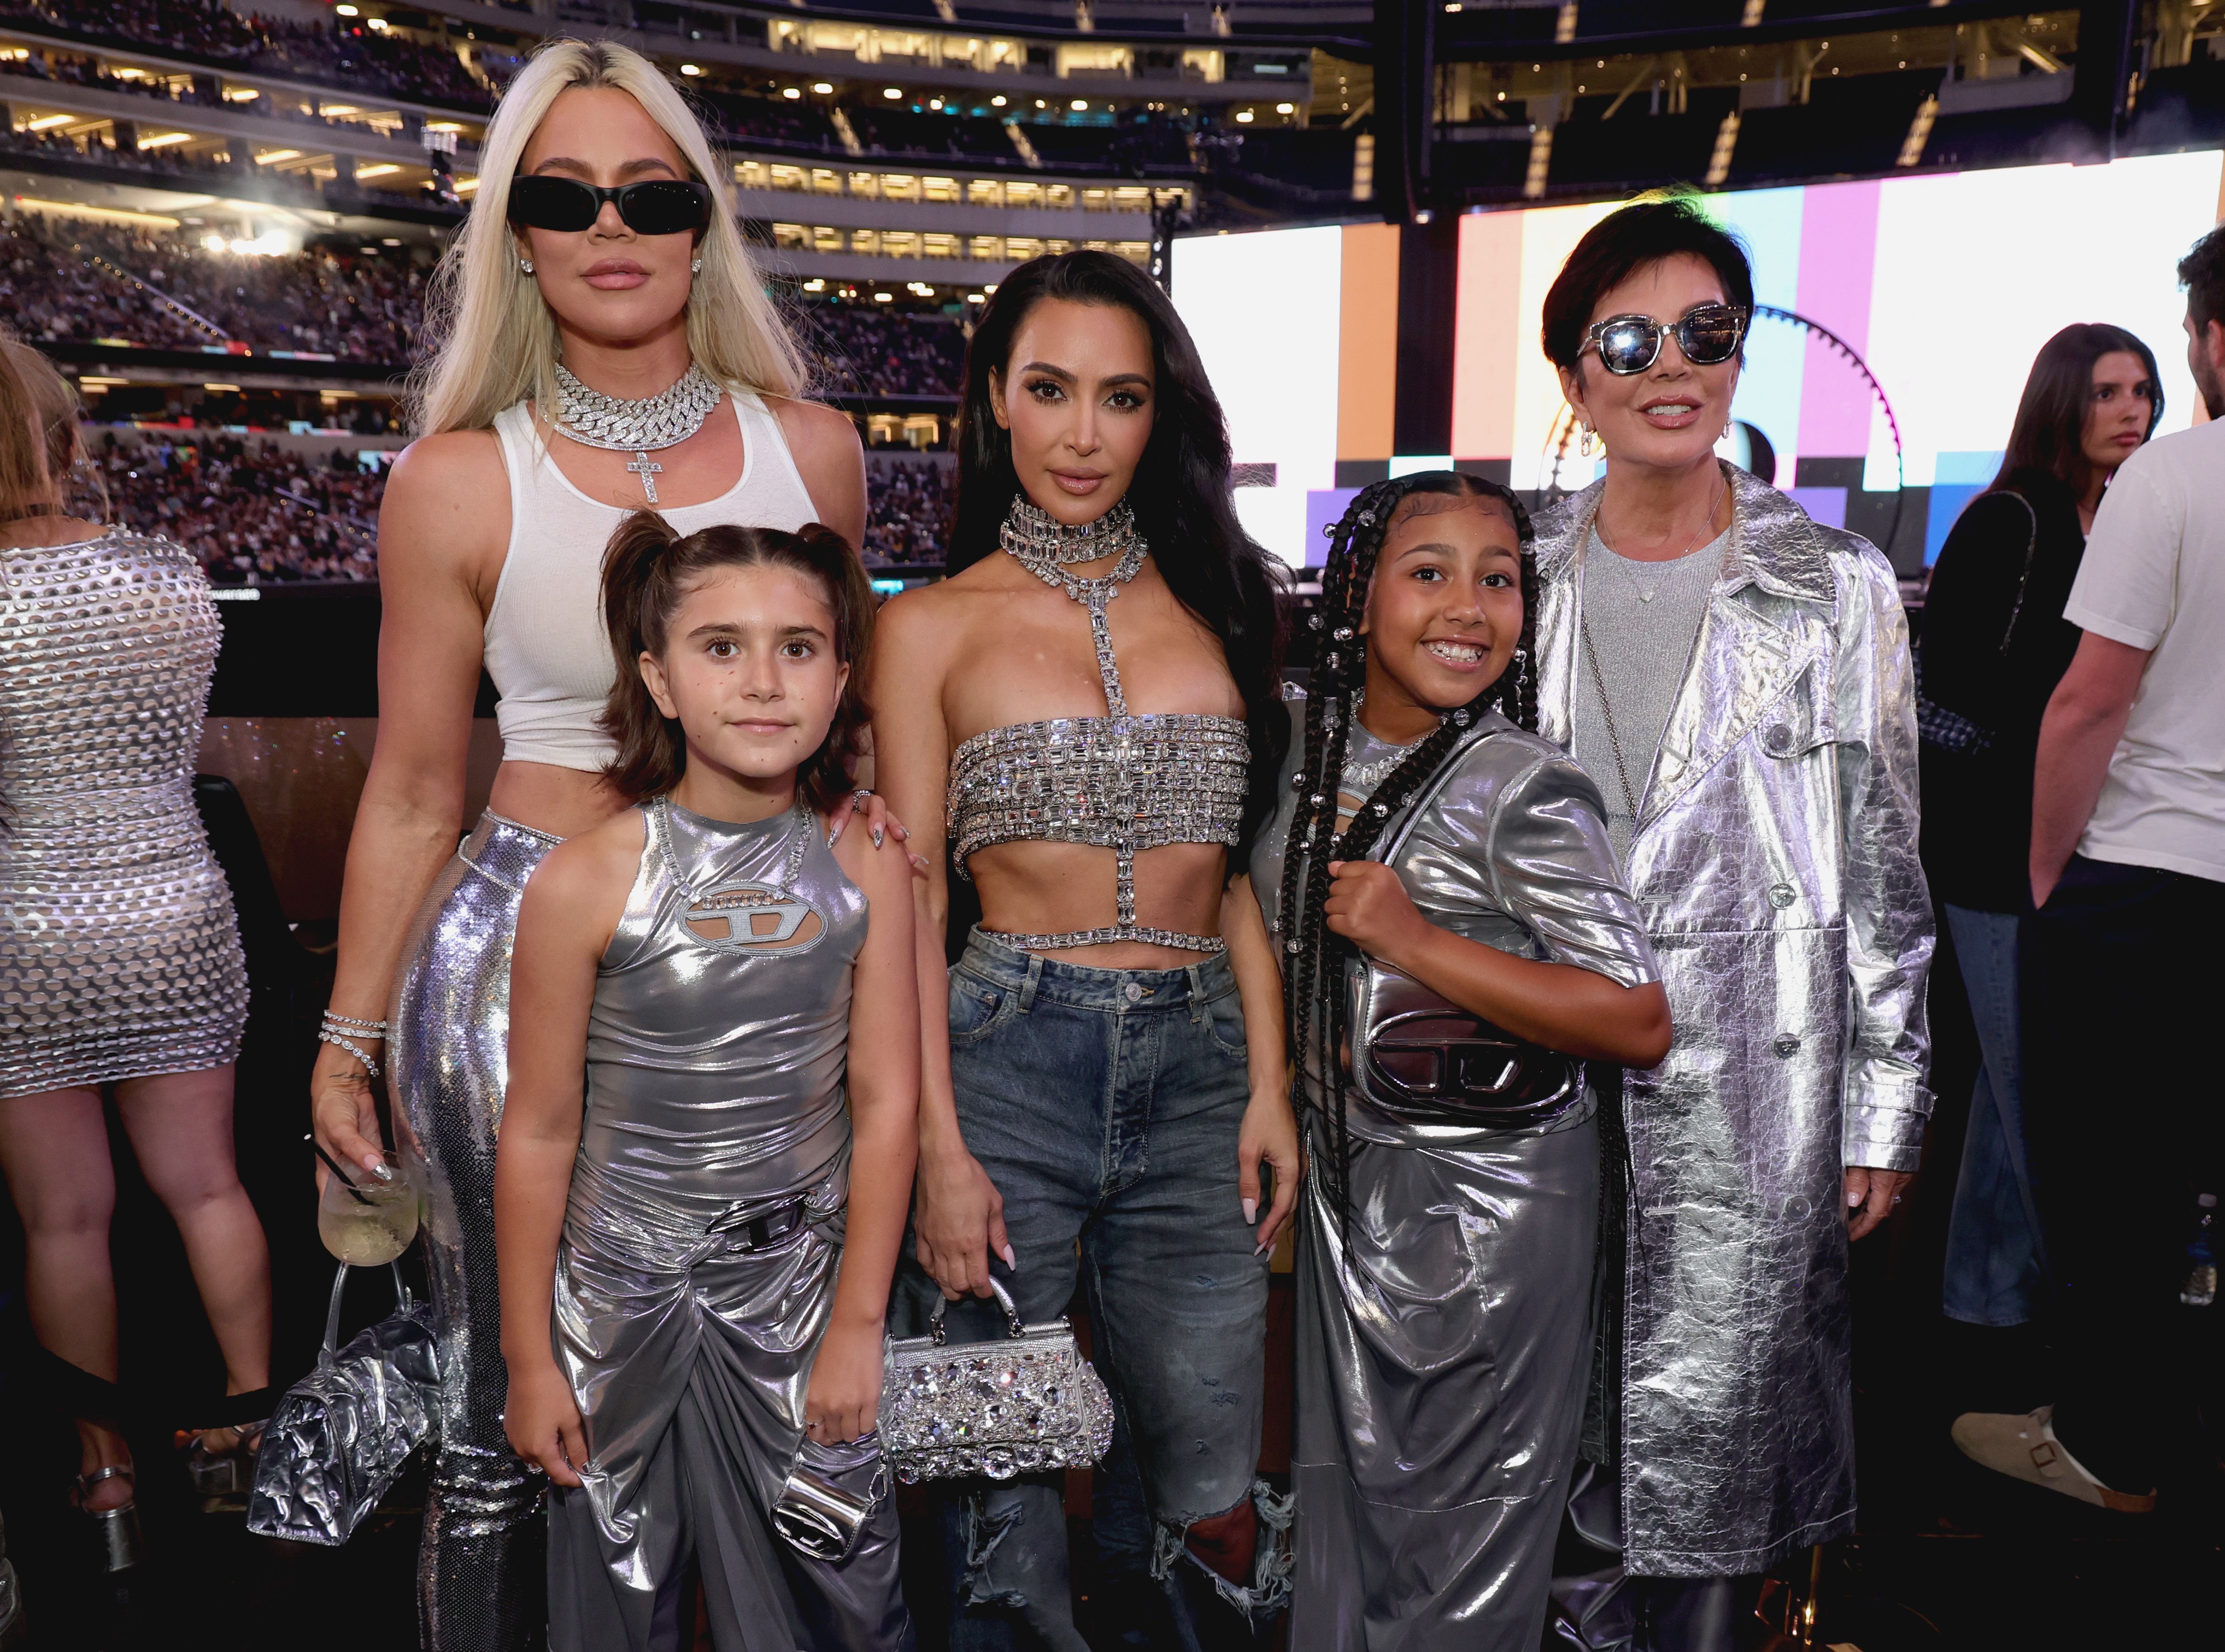 North pictured with aunt Khloe, cousin Penelope, Kim, and grandmother Kris Jenner